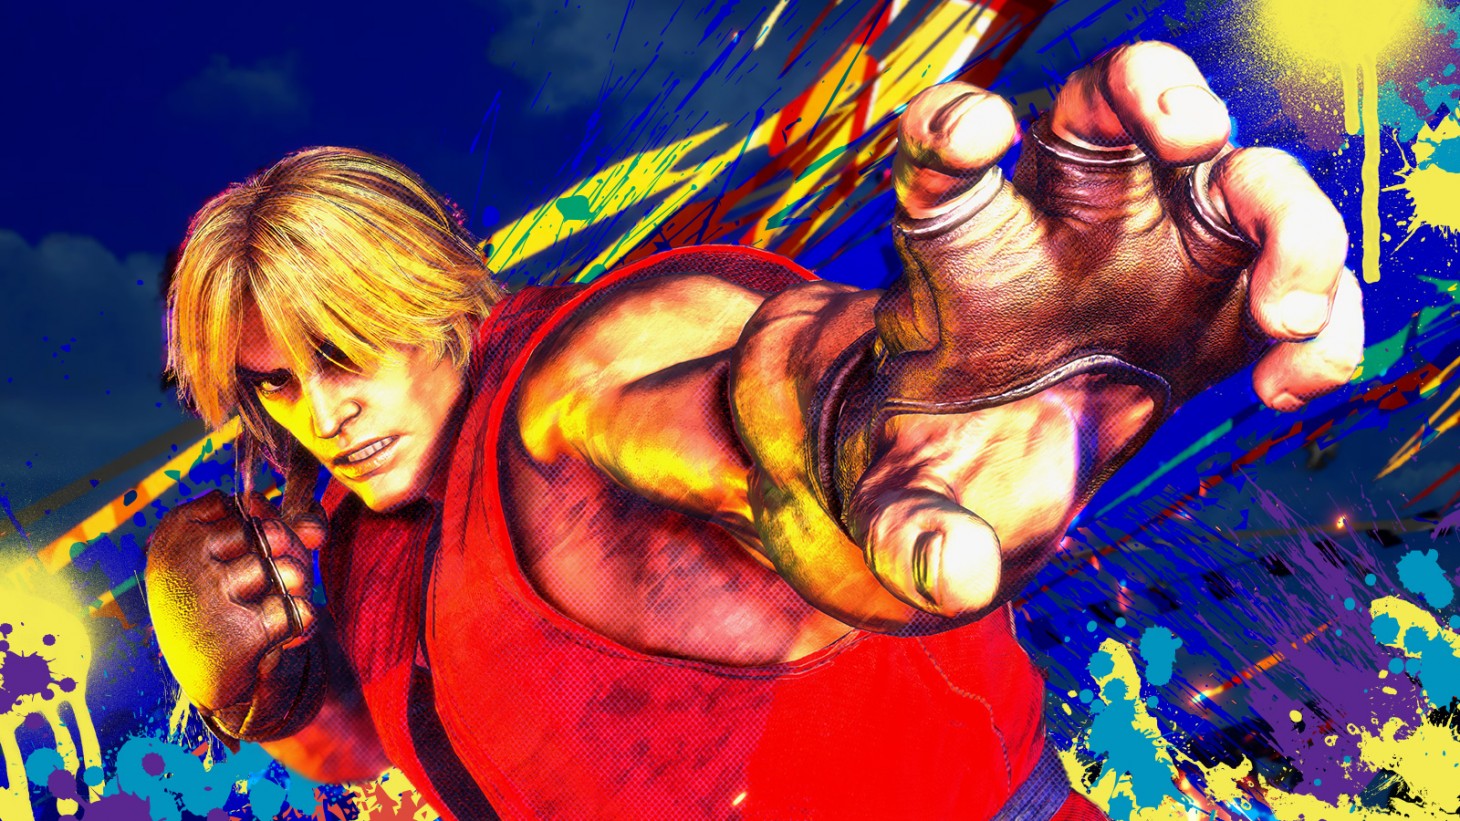 King of Fighters XV: First Gameplay, 6 Characters Revealed